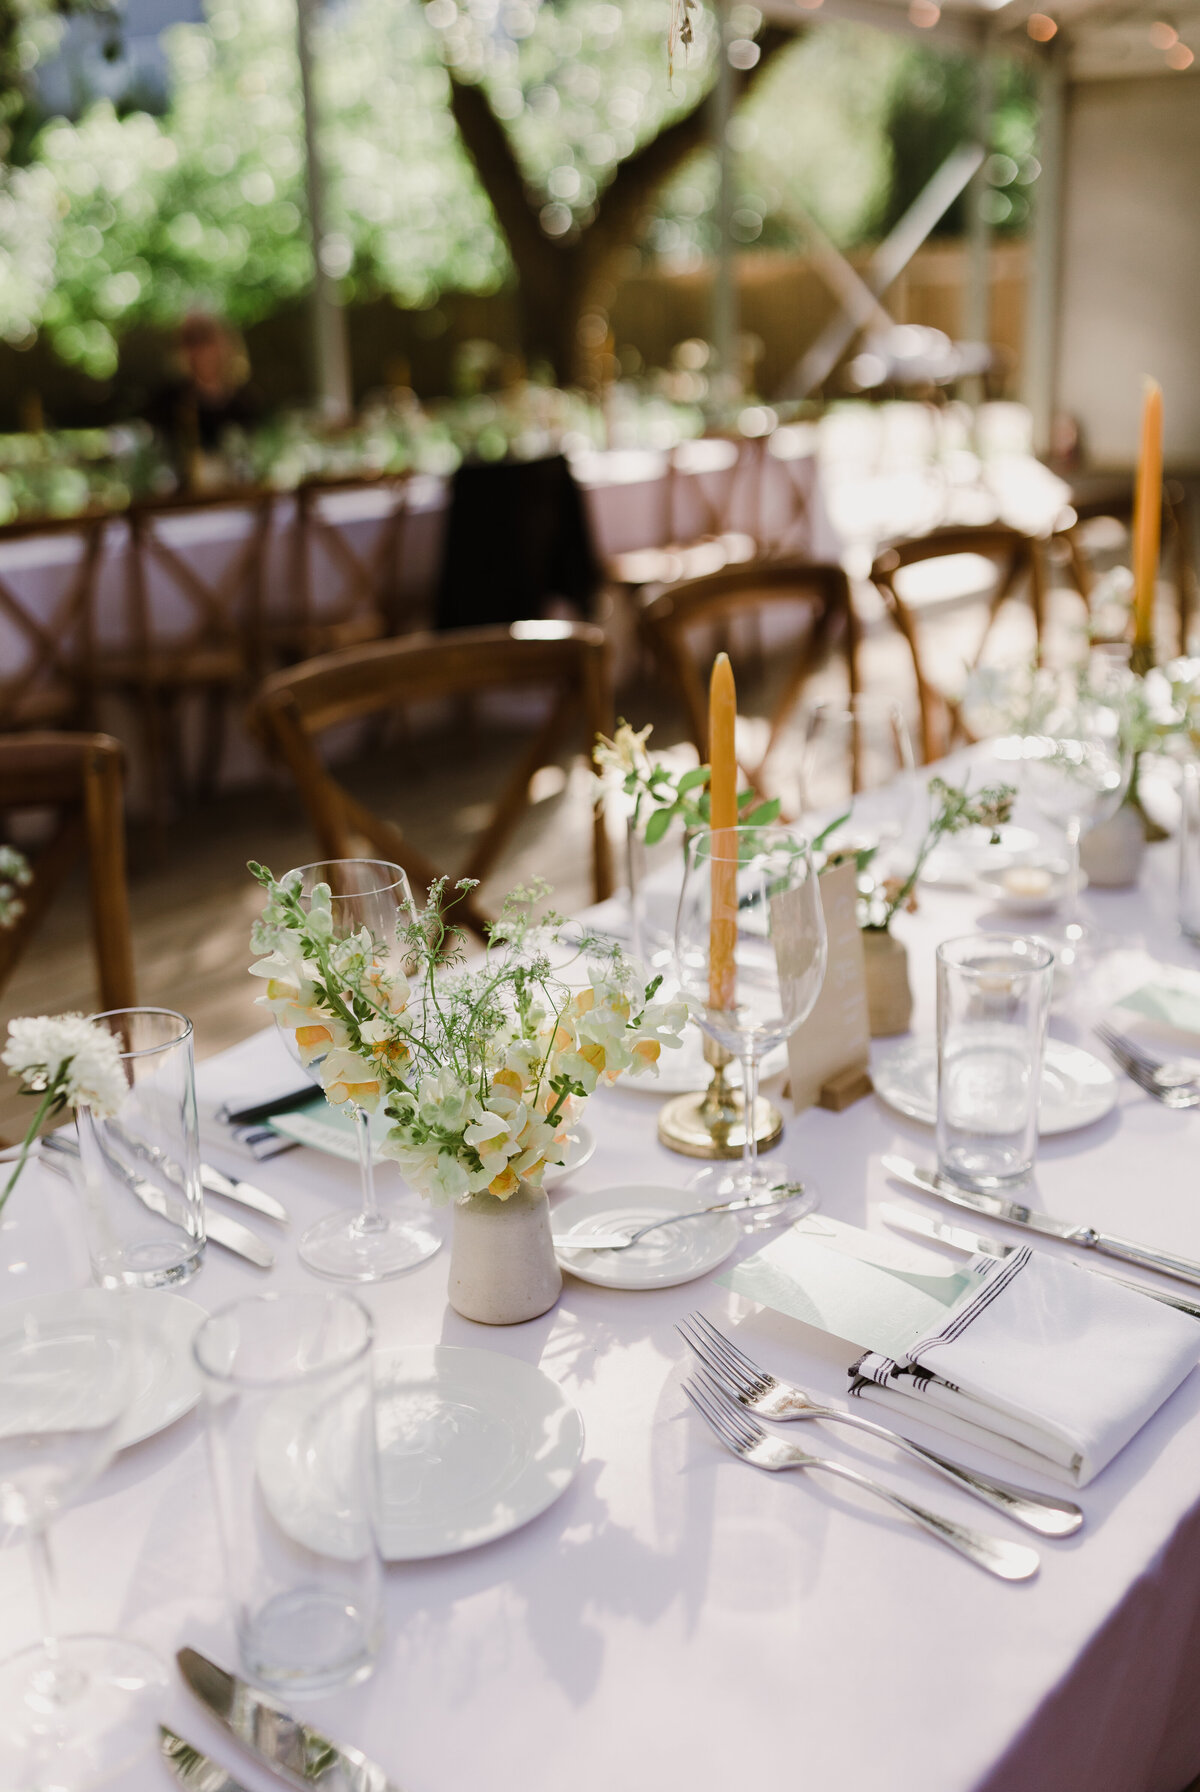 Wedding tablescape with white linens and white florals at Mattie's wedding venue in Austin